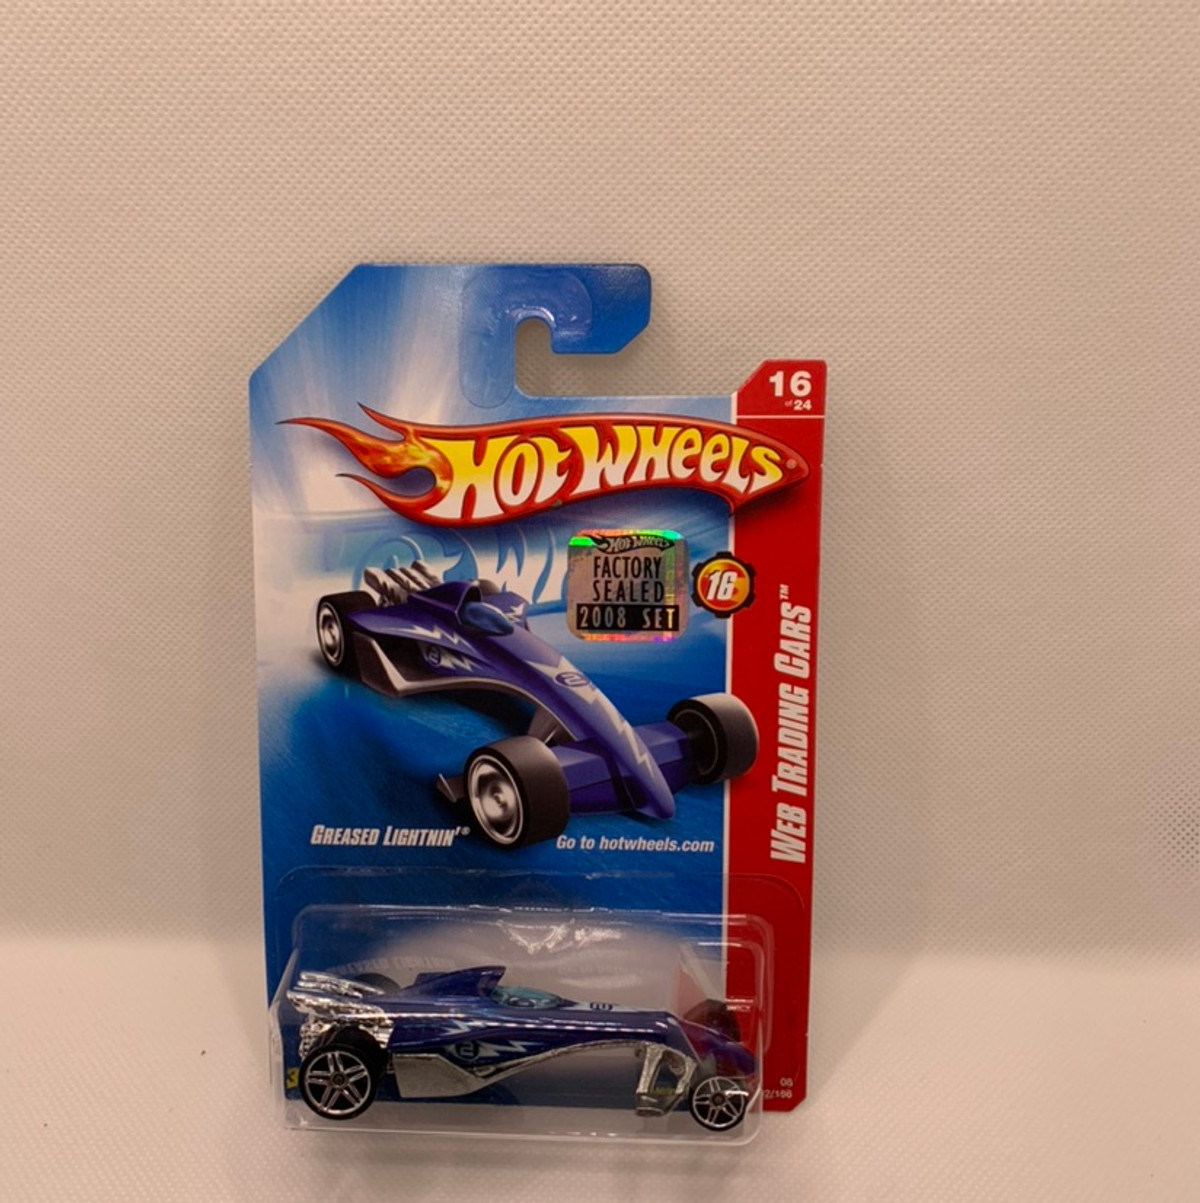 2008 Hot wheels Greased Lightnin Blue Version With Factory Set Sticker 